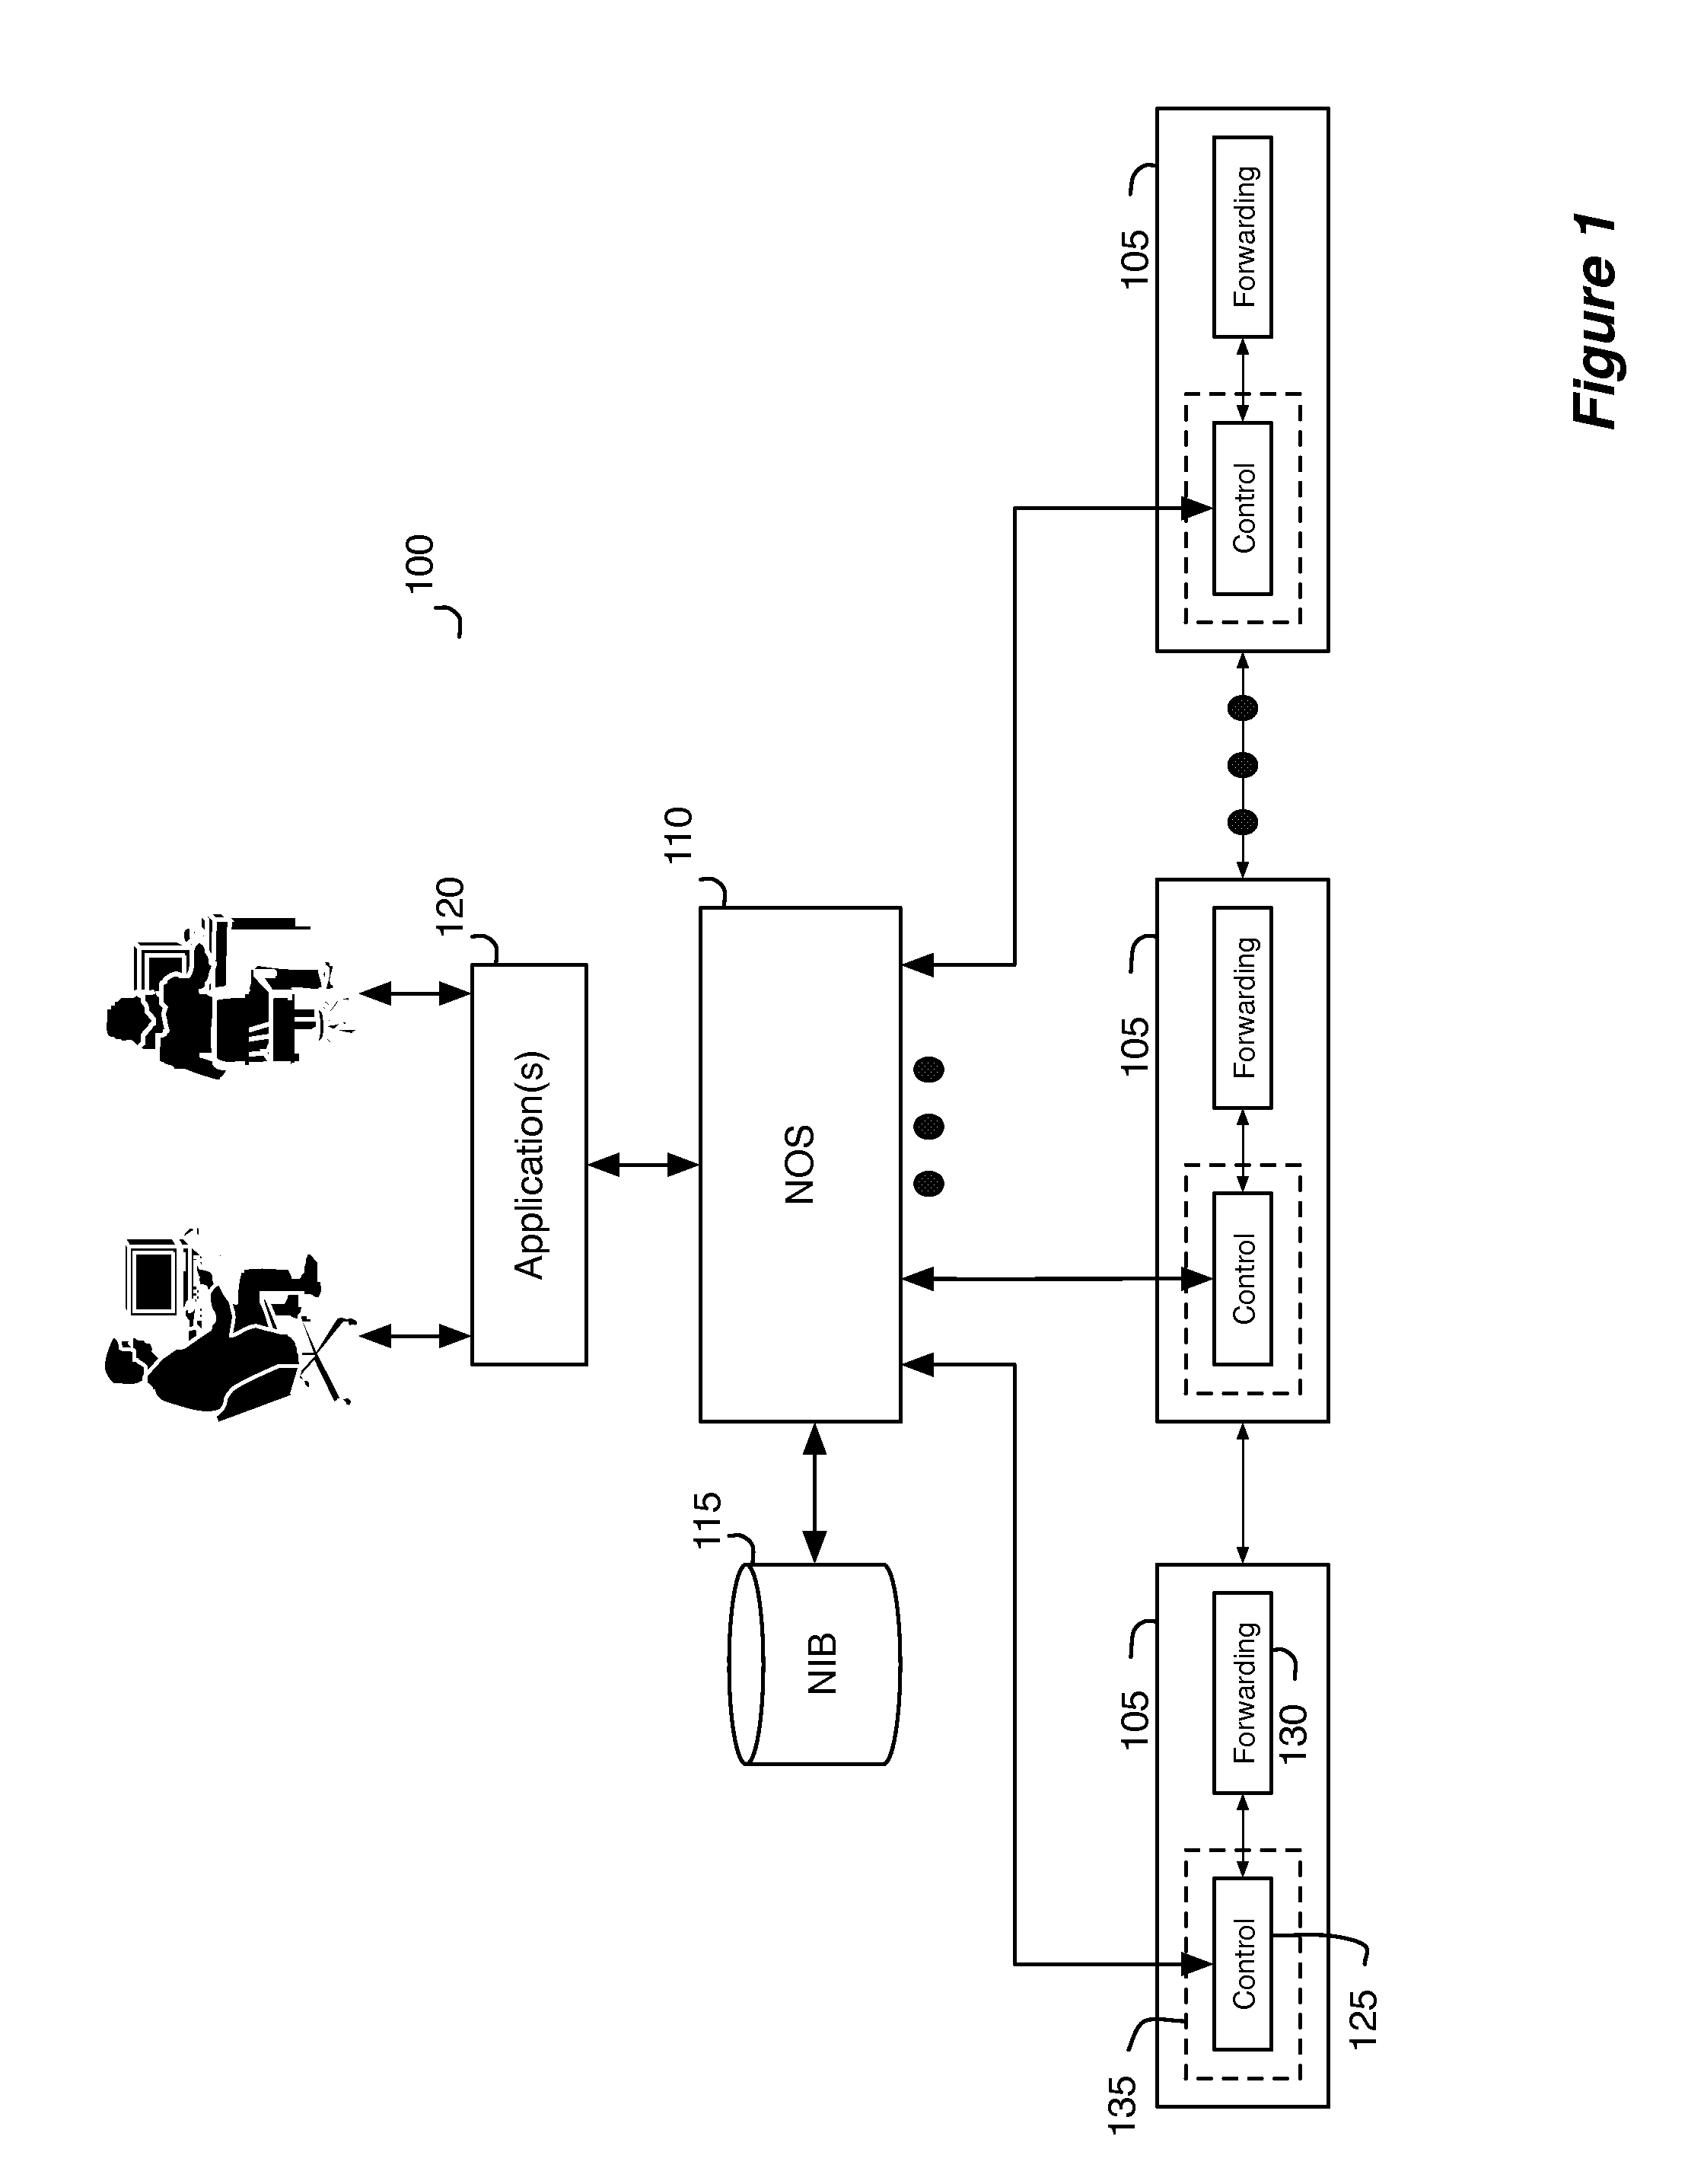 Network control apparatus and method for populating logical datapath sets